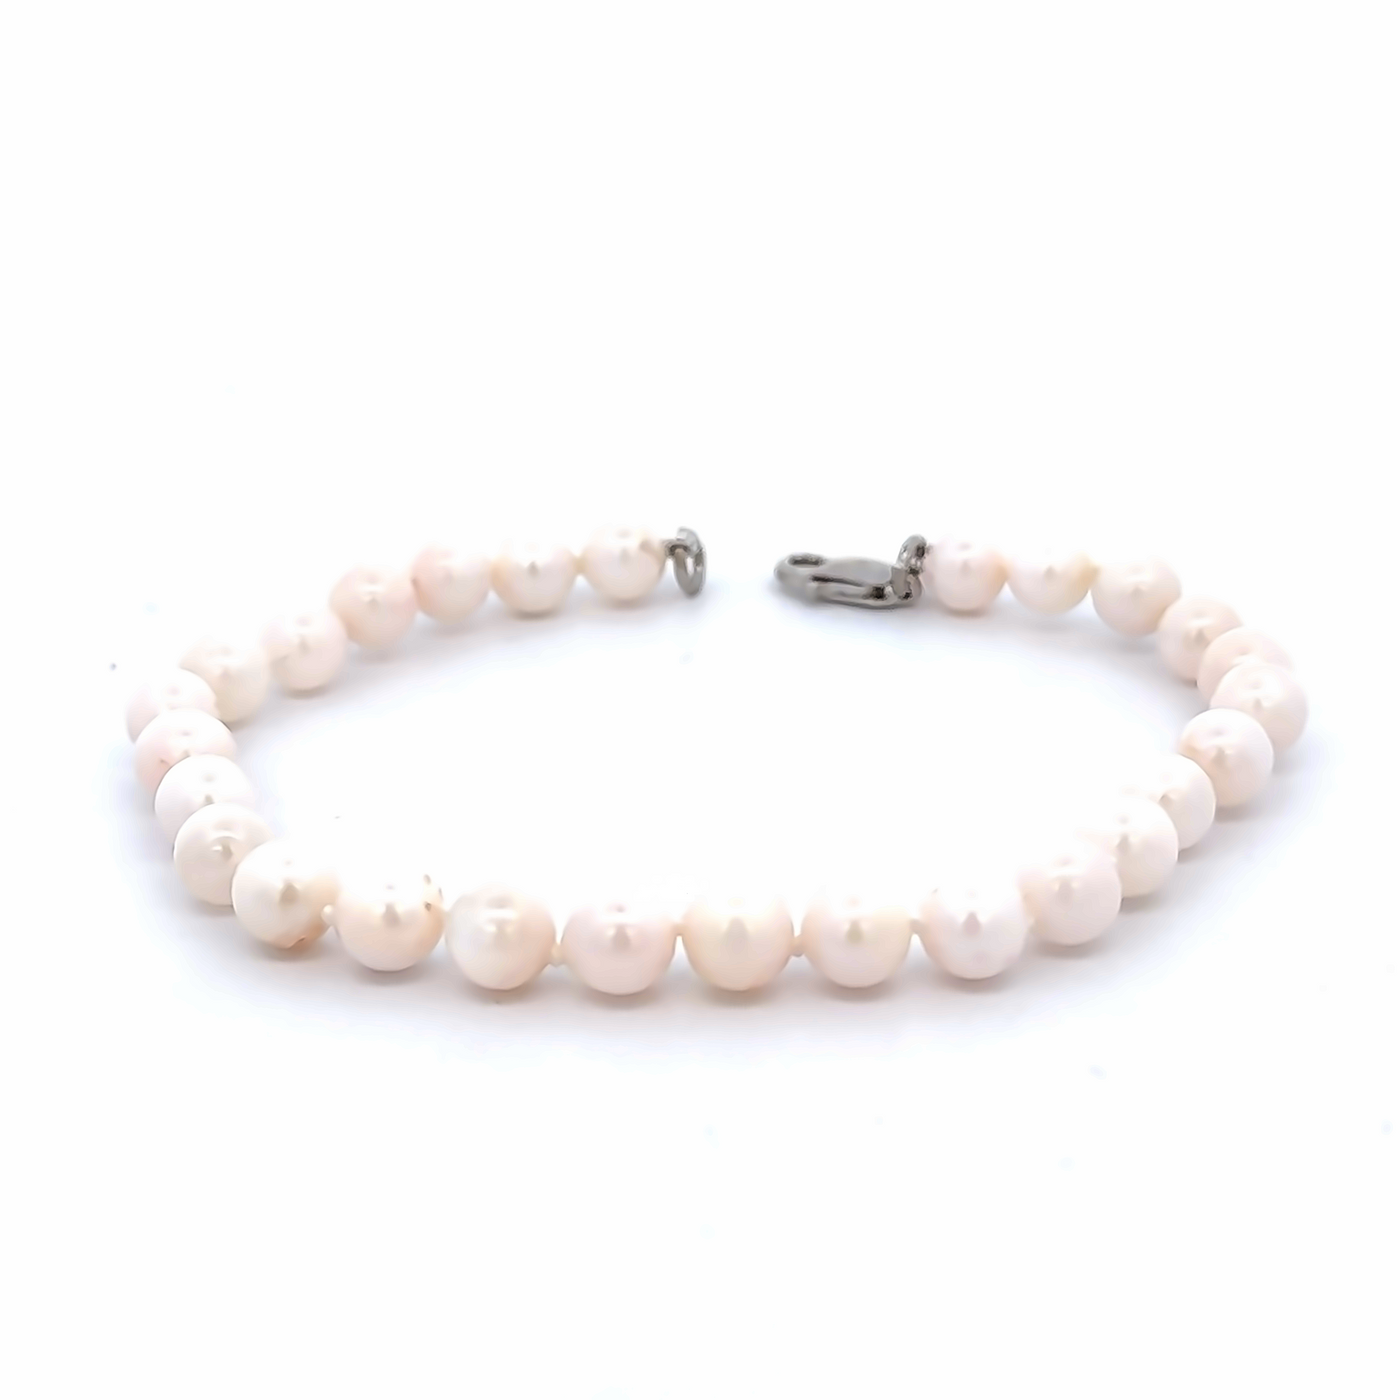 Cultured Pearl Bracelet With Sterling Silver Clasp